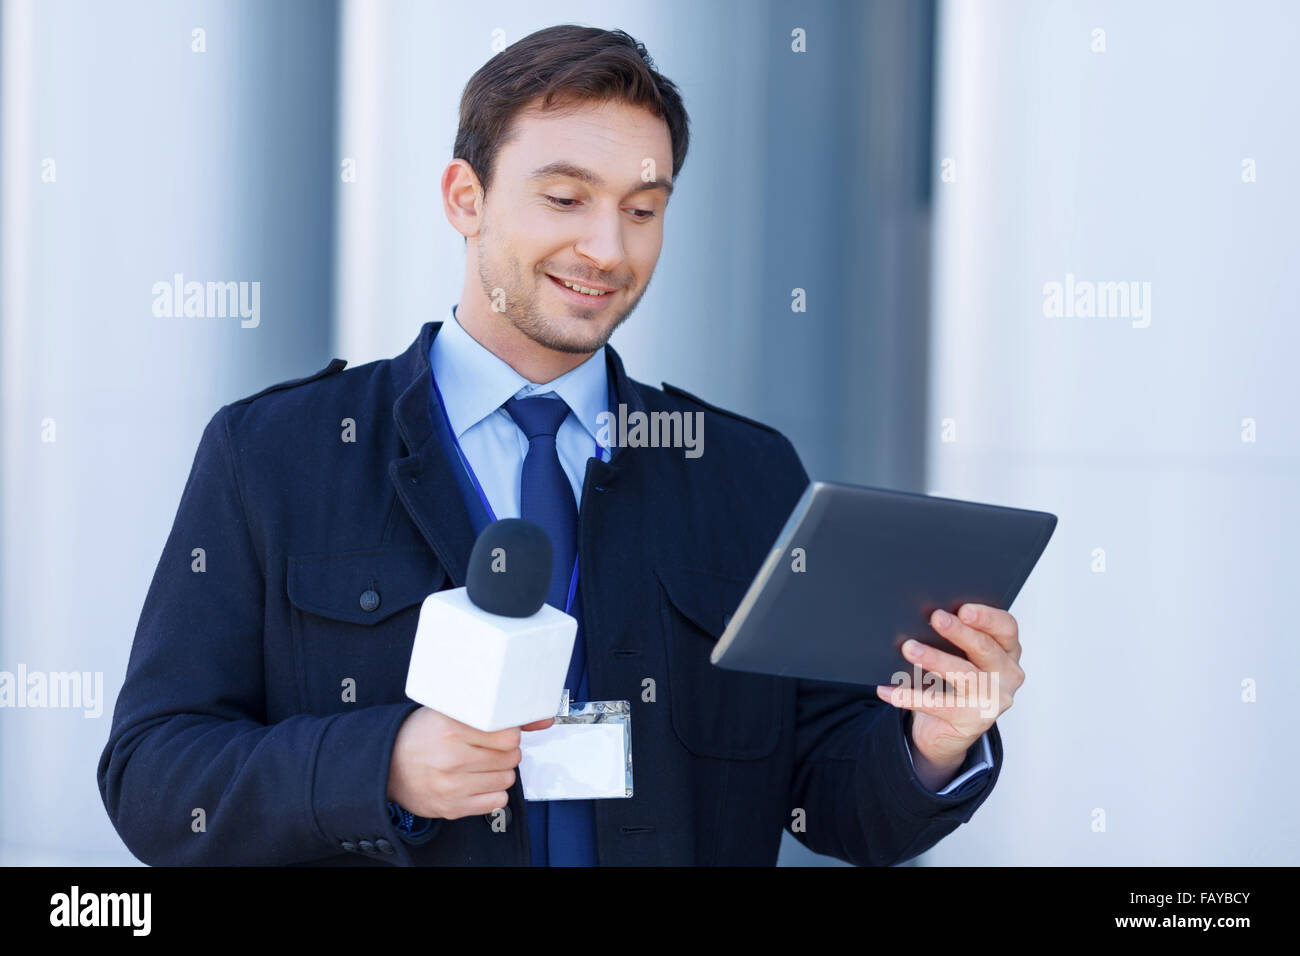 Newshawk is amused by information on his tablet. Stock Photo